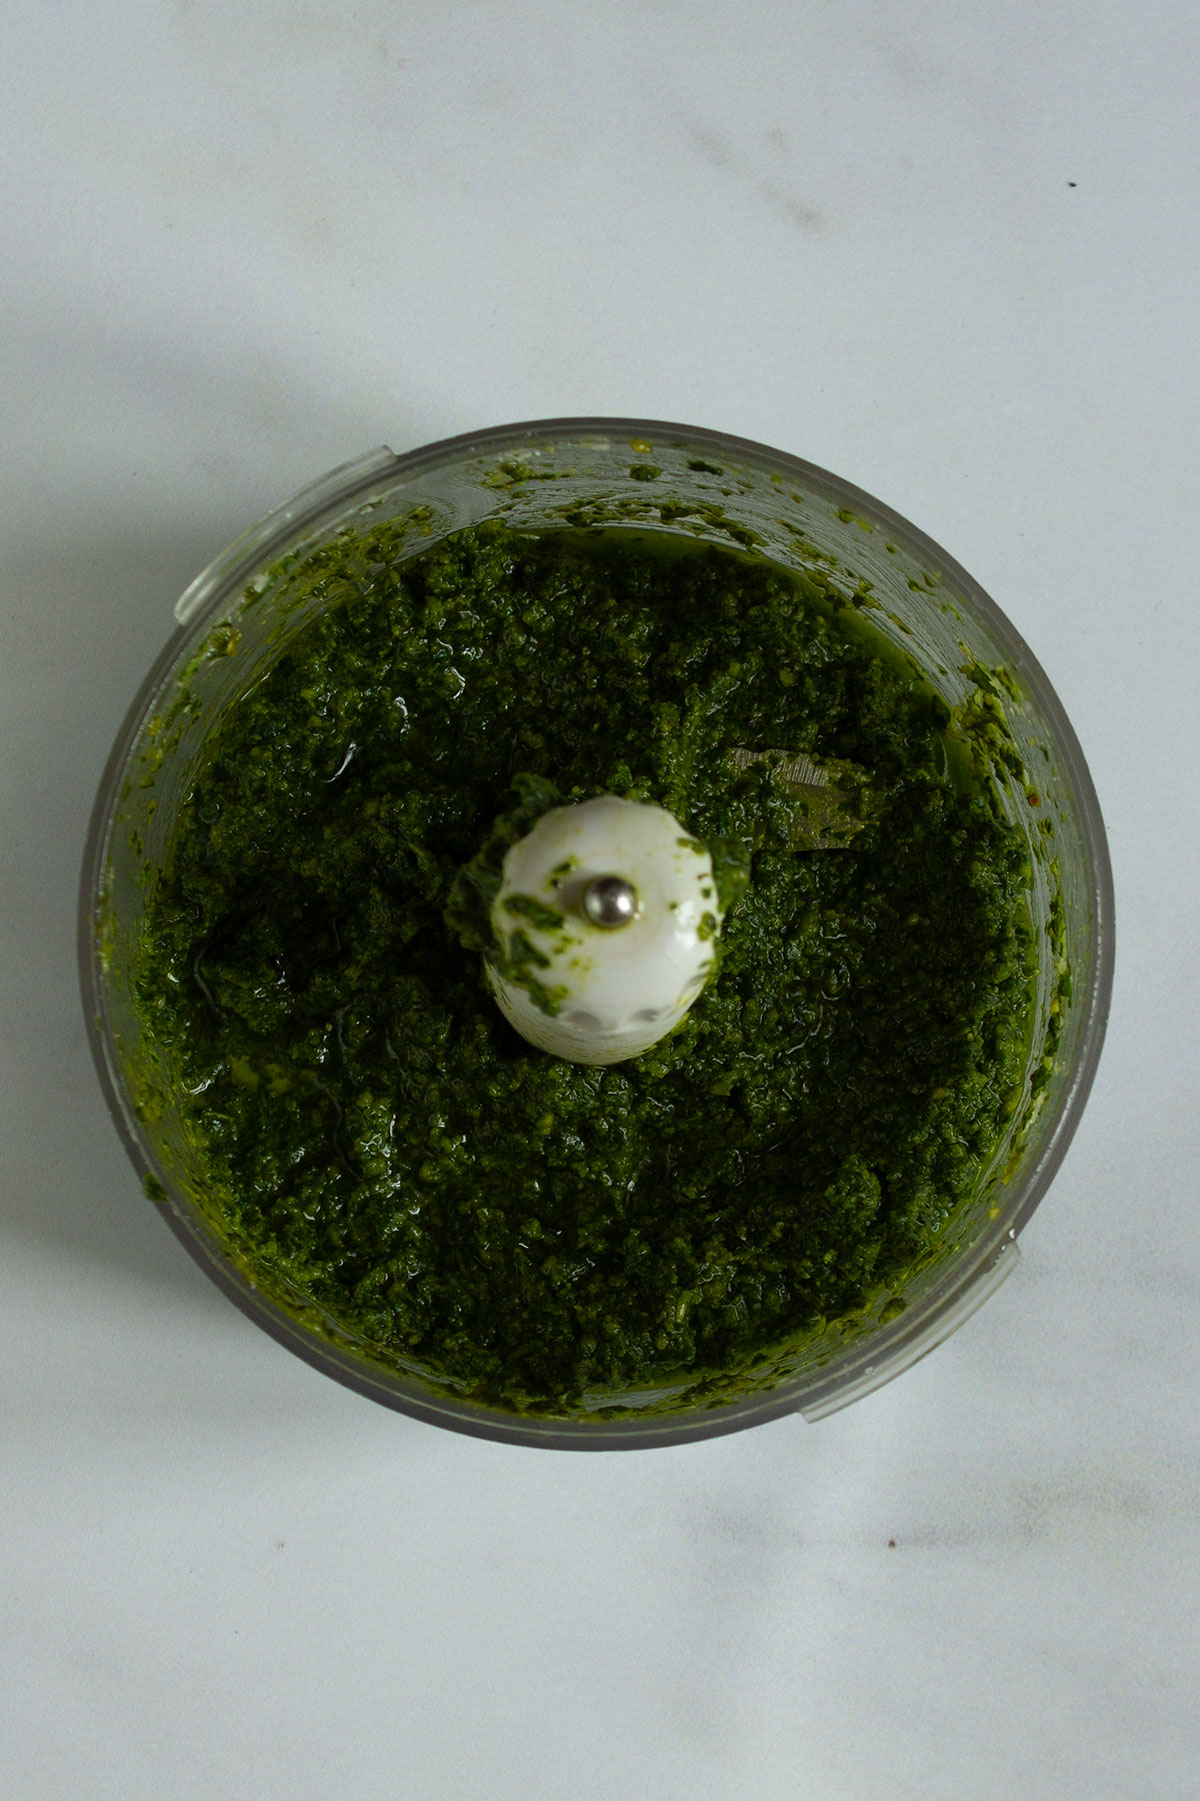 Blending the pesto with olive oil in a food processor until it reaches the desired consistency.